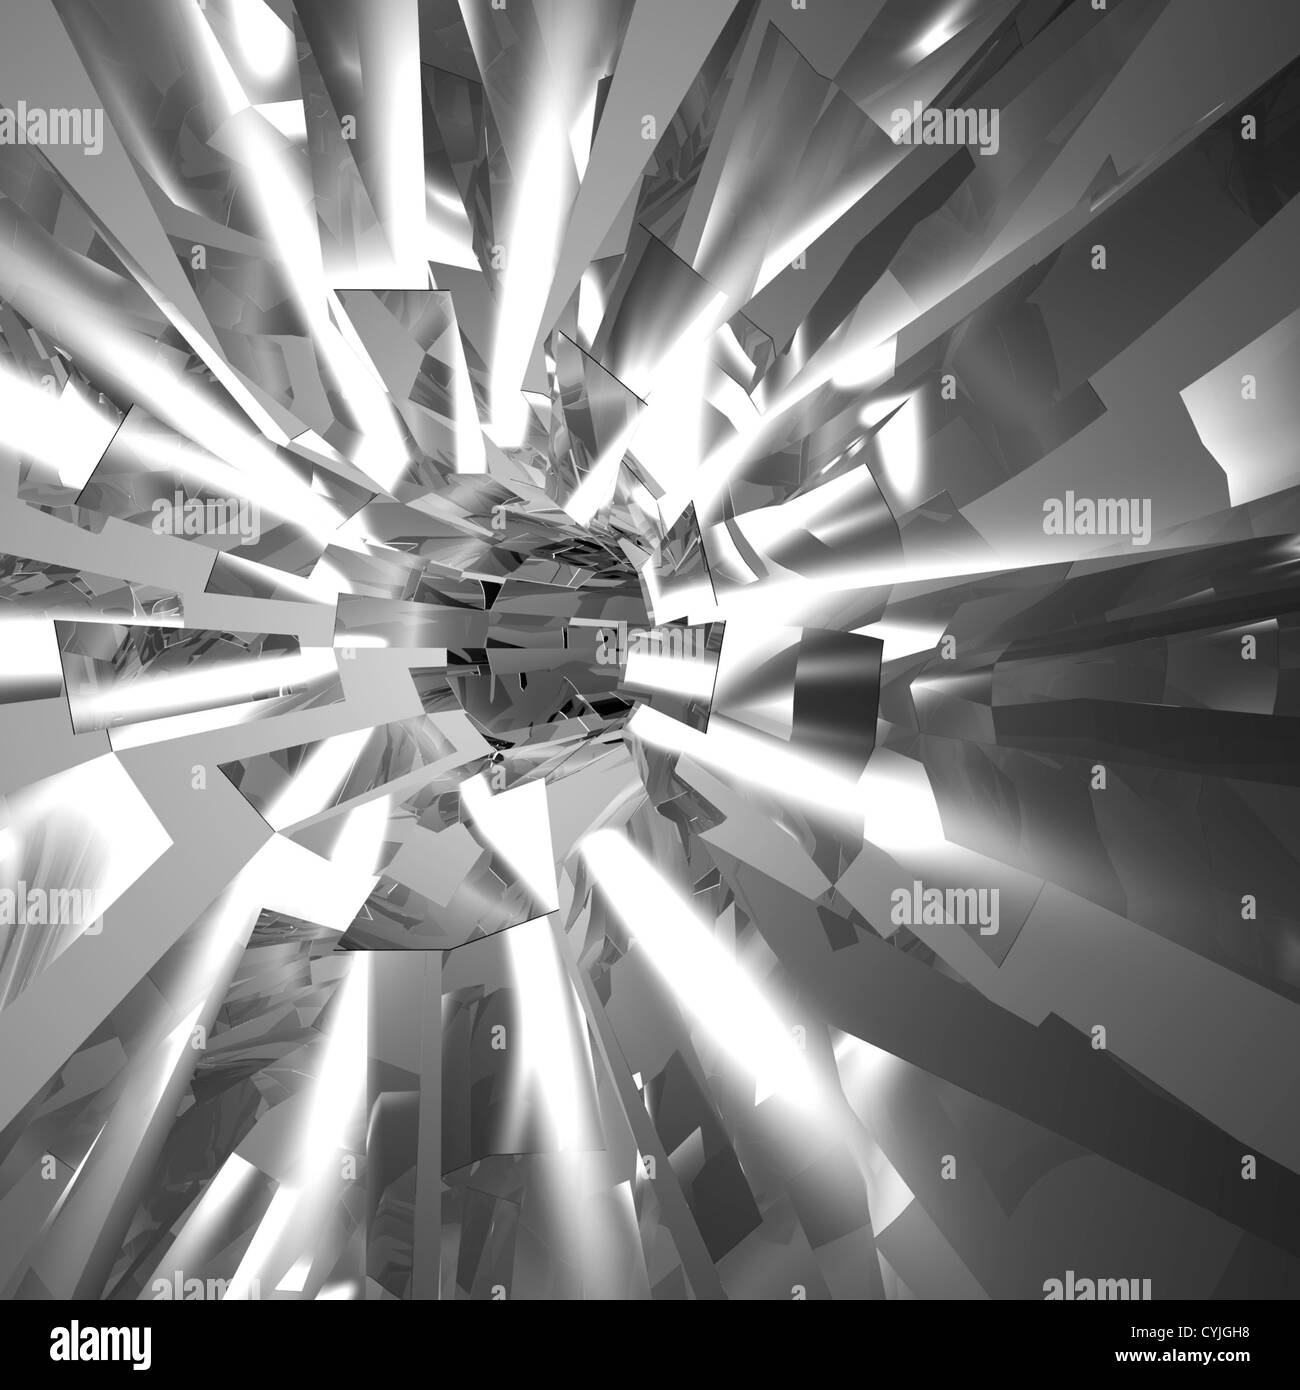 Shiny Exploding Gray Metal Or Glass Background Of Shattered Pieces Stock Photo